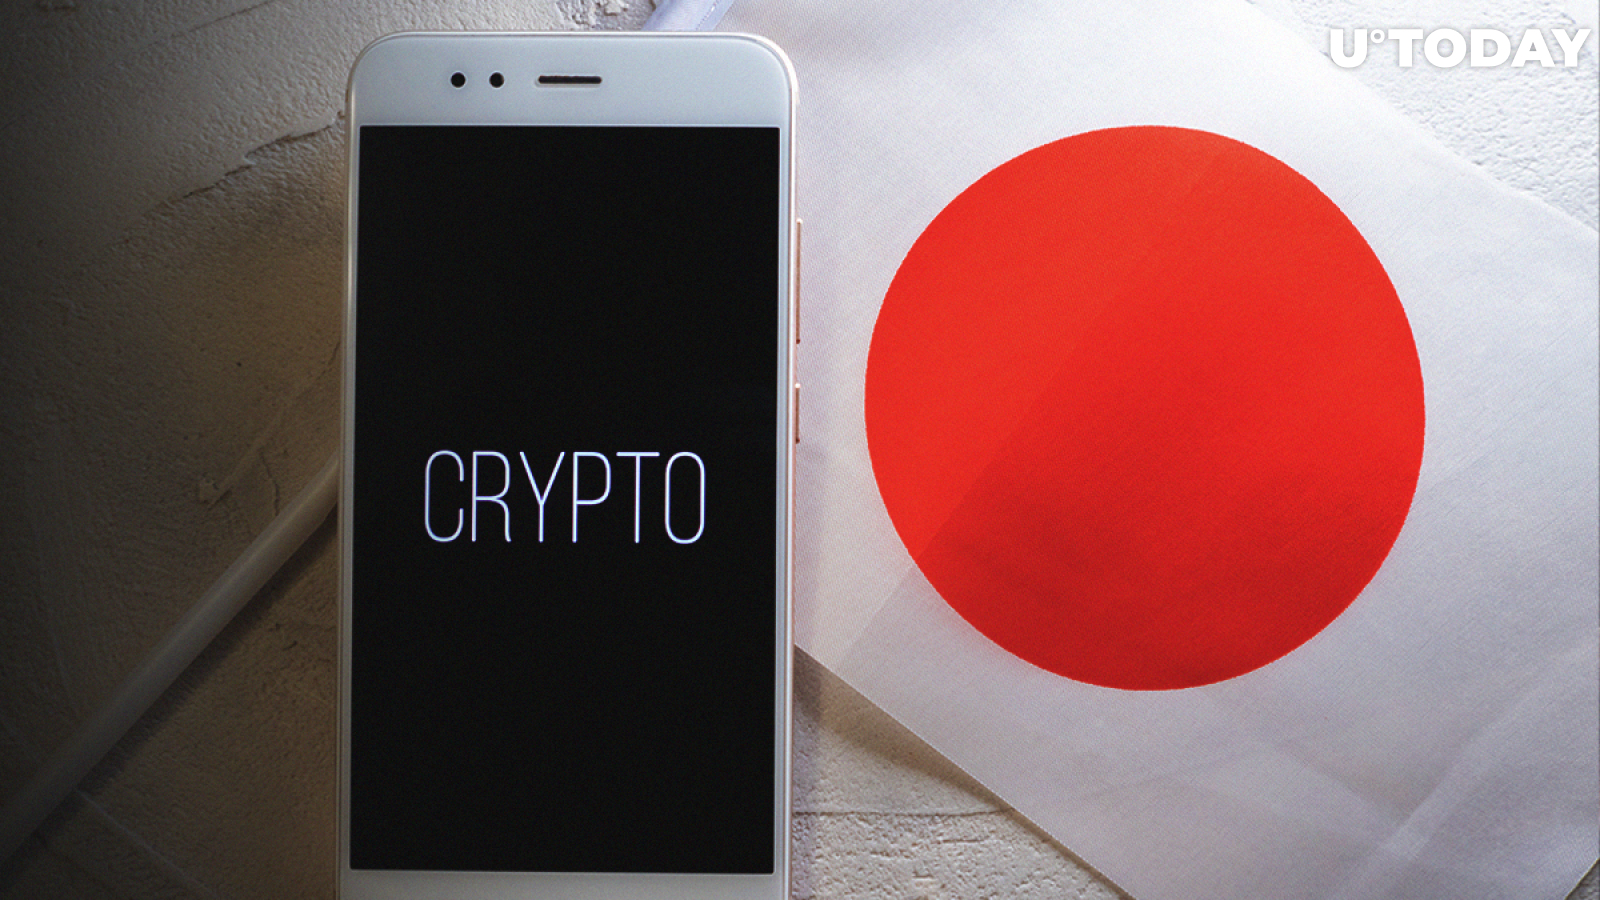 Japan’s State Crypto: ‘The Sooner, the Better’ - Says Senior Ruling Party Rep